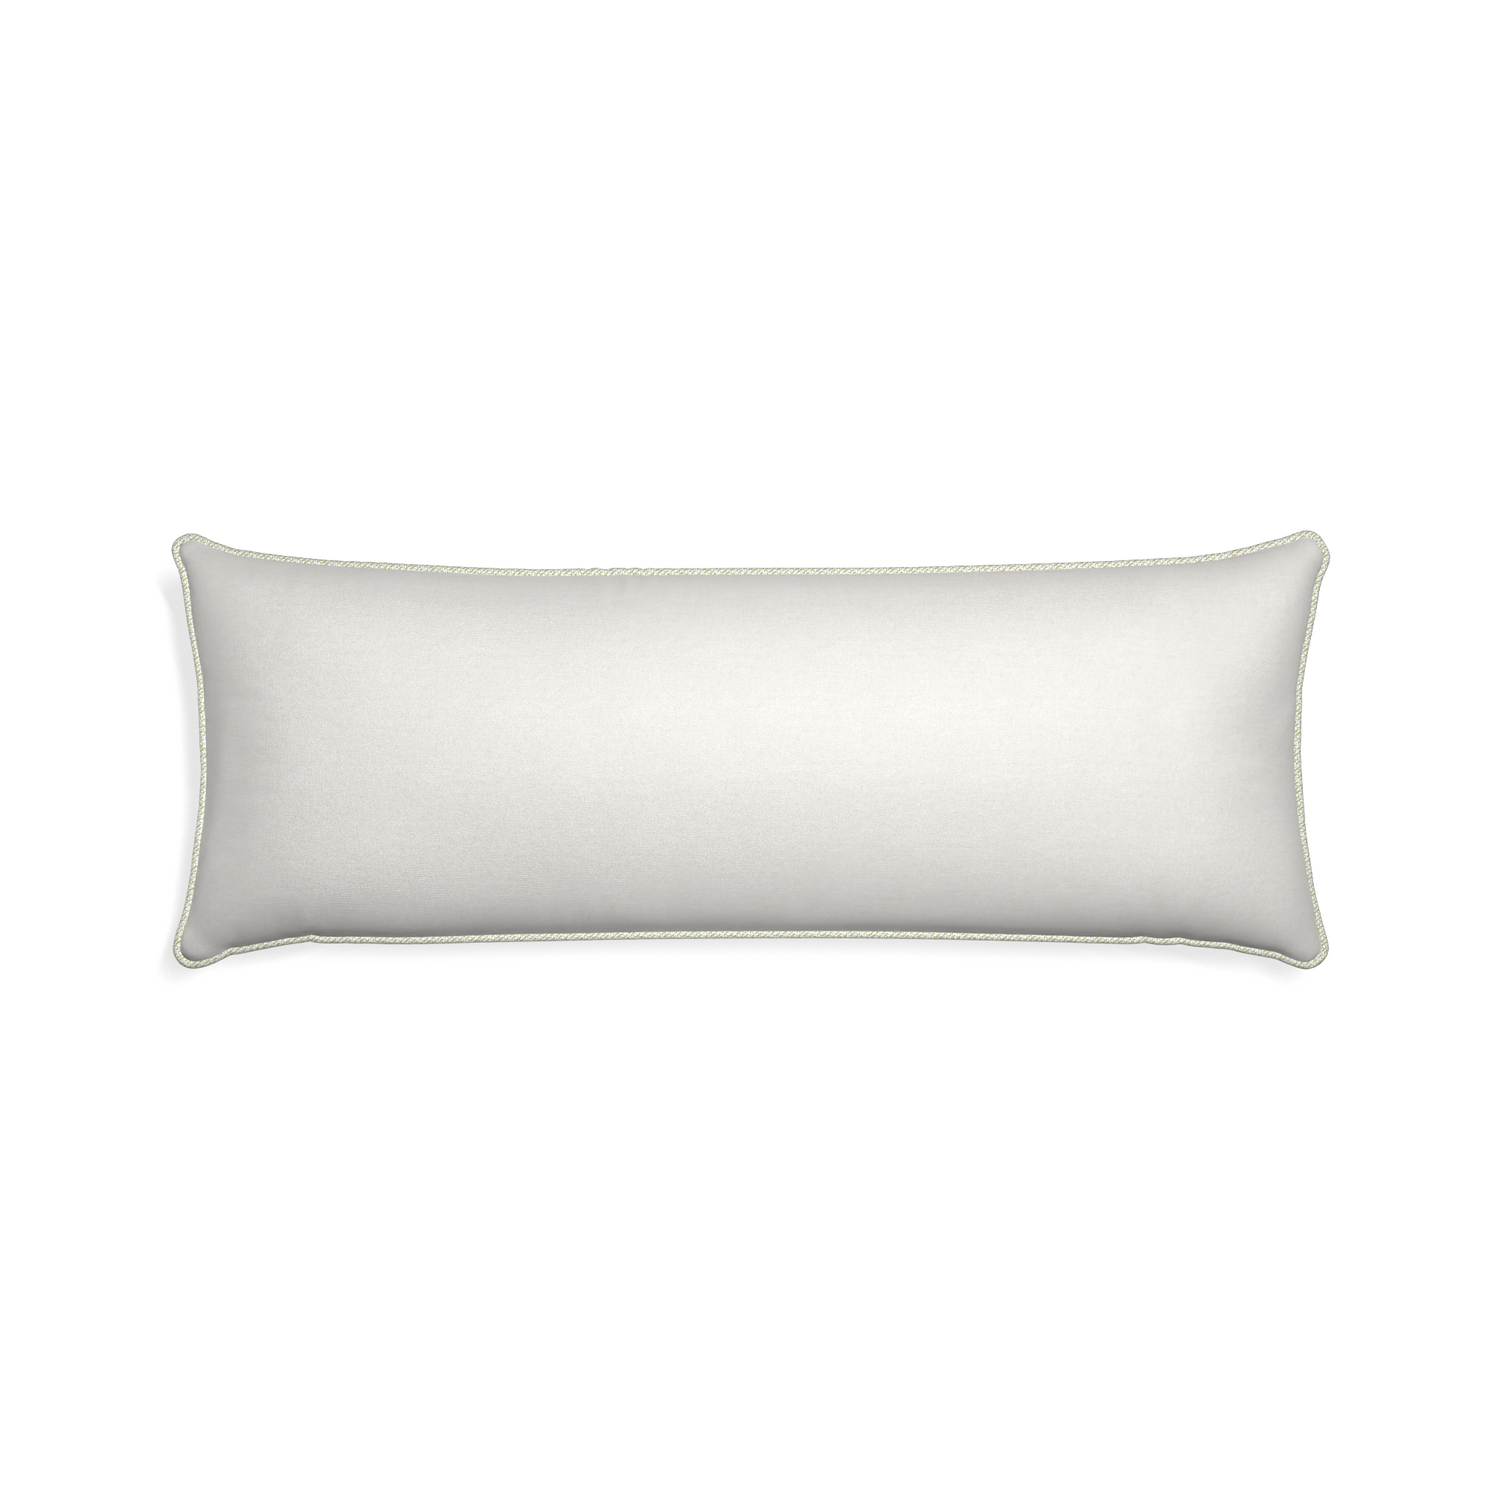 Xl-lumbar flour custom pillow with l piping on white background